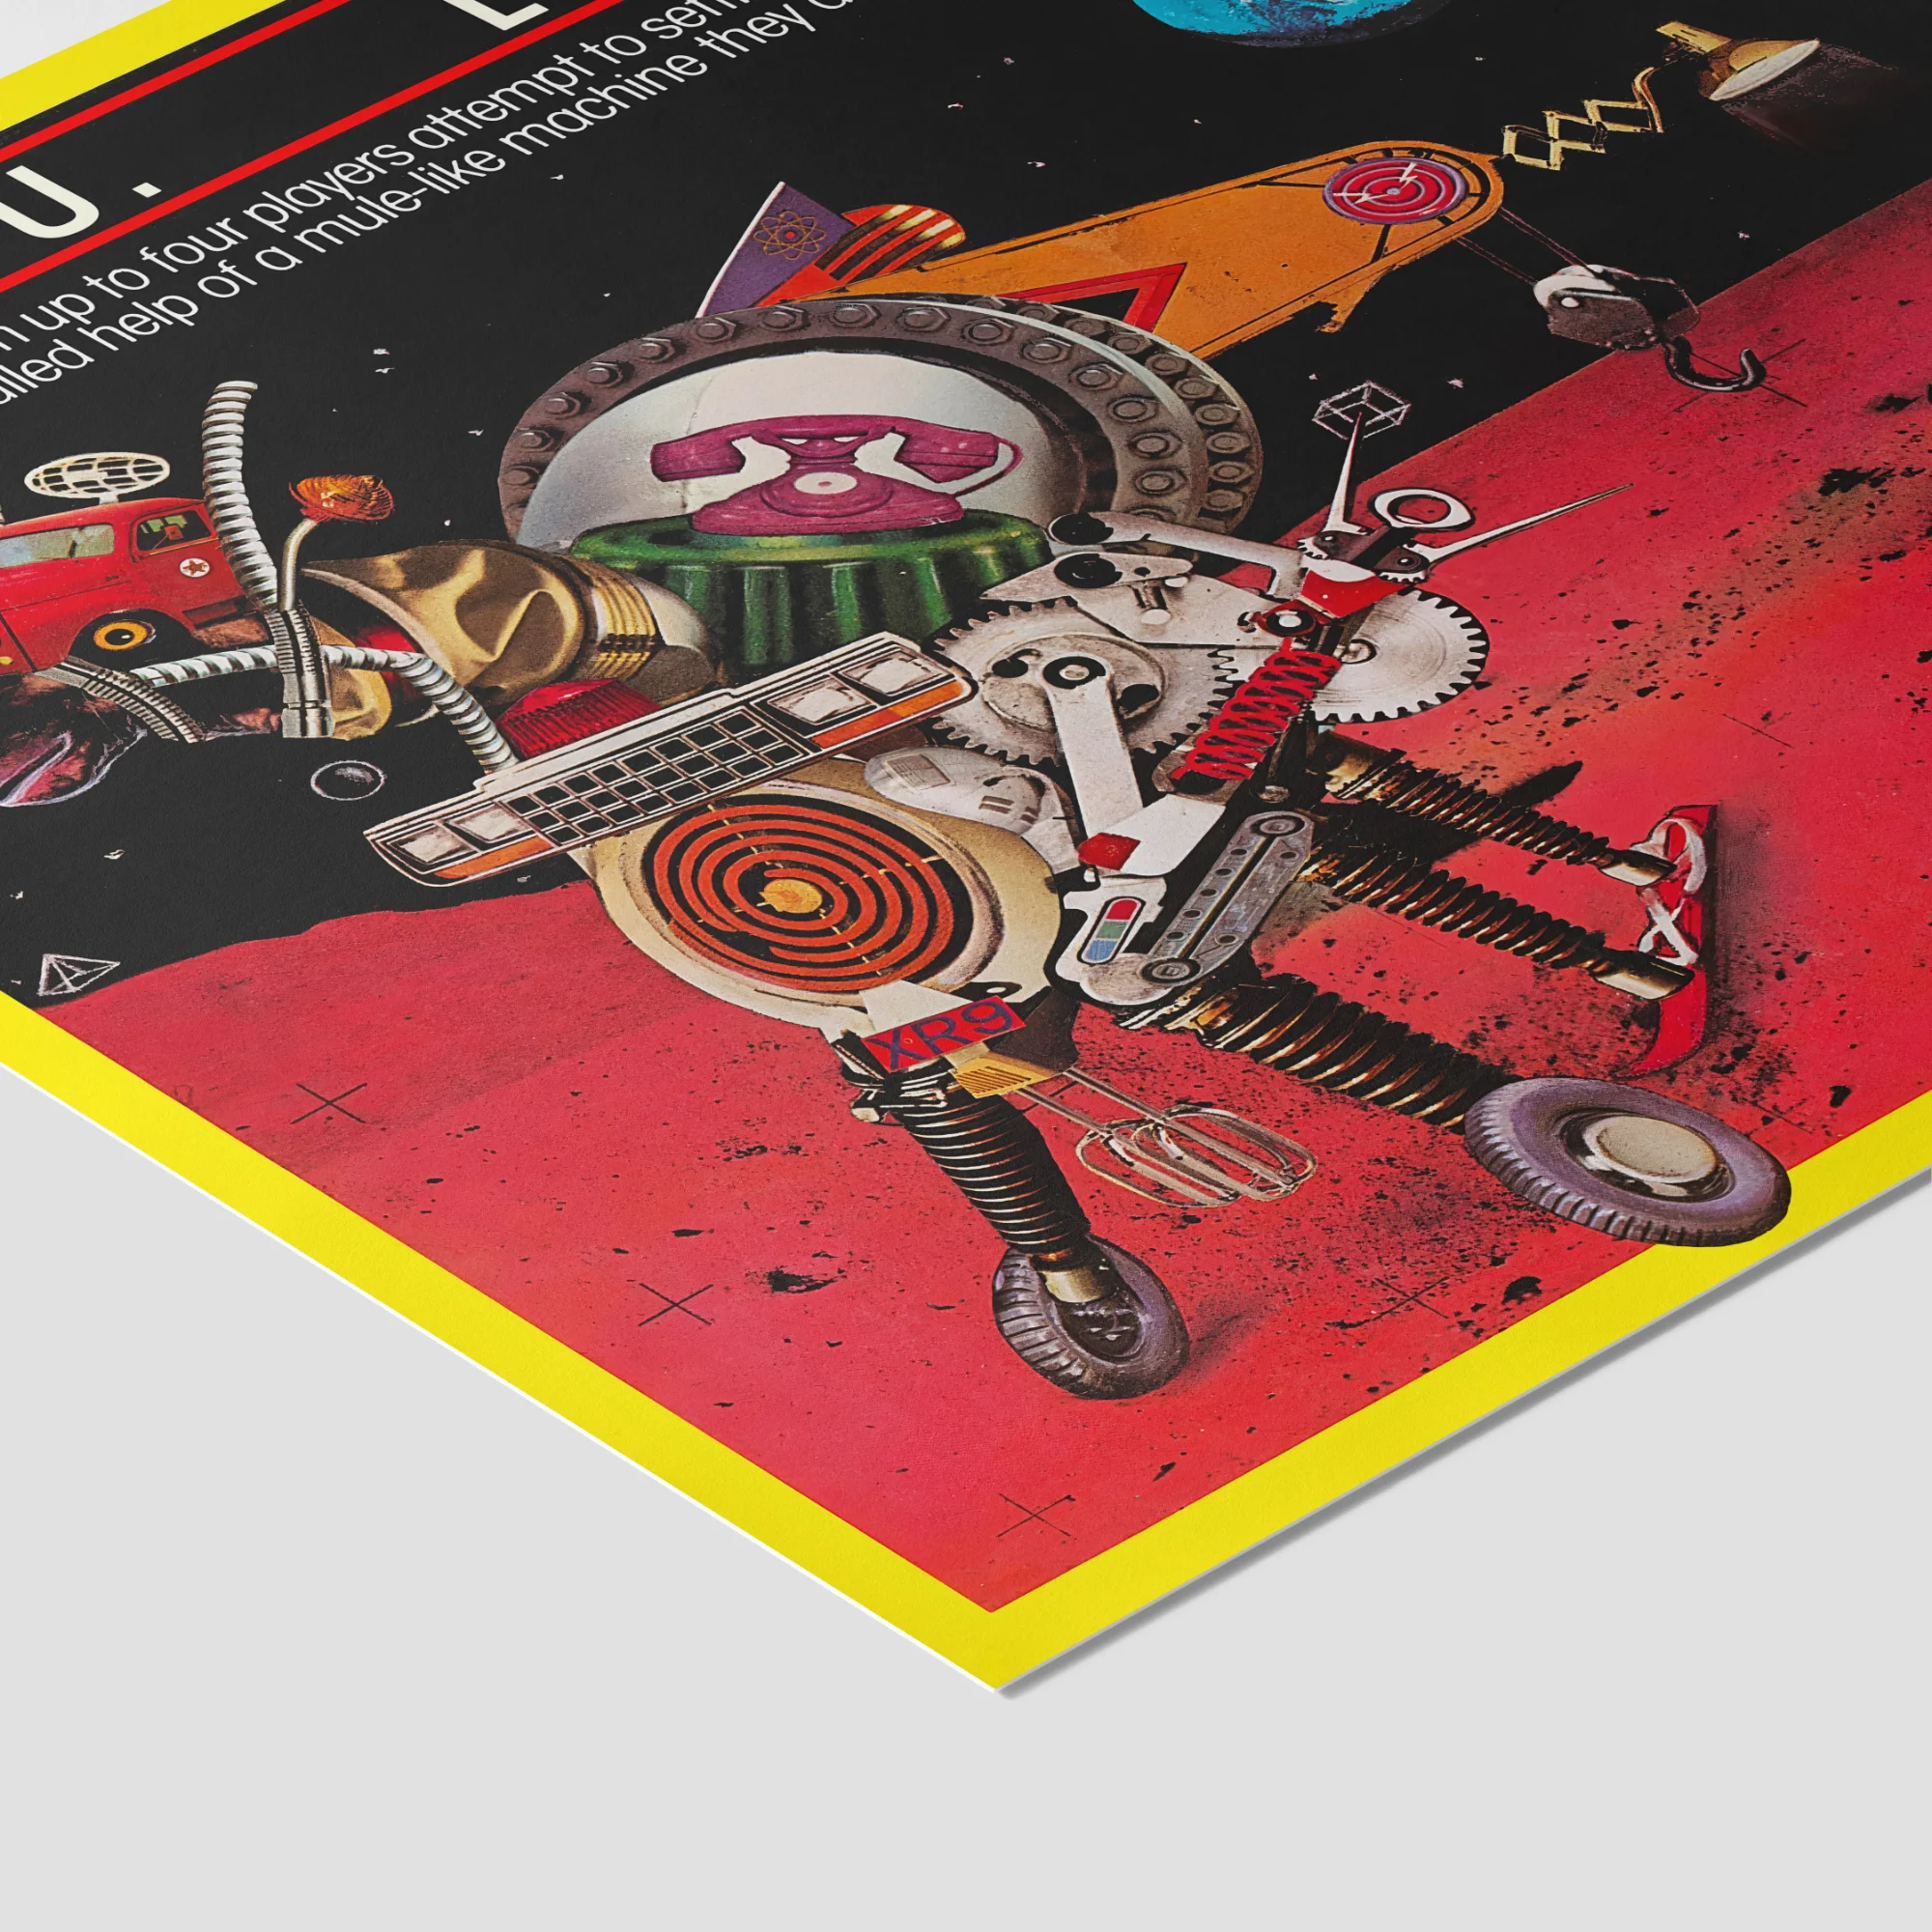 Colourful robotic figure playing guitar on space-themed board game.